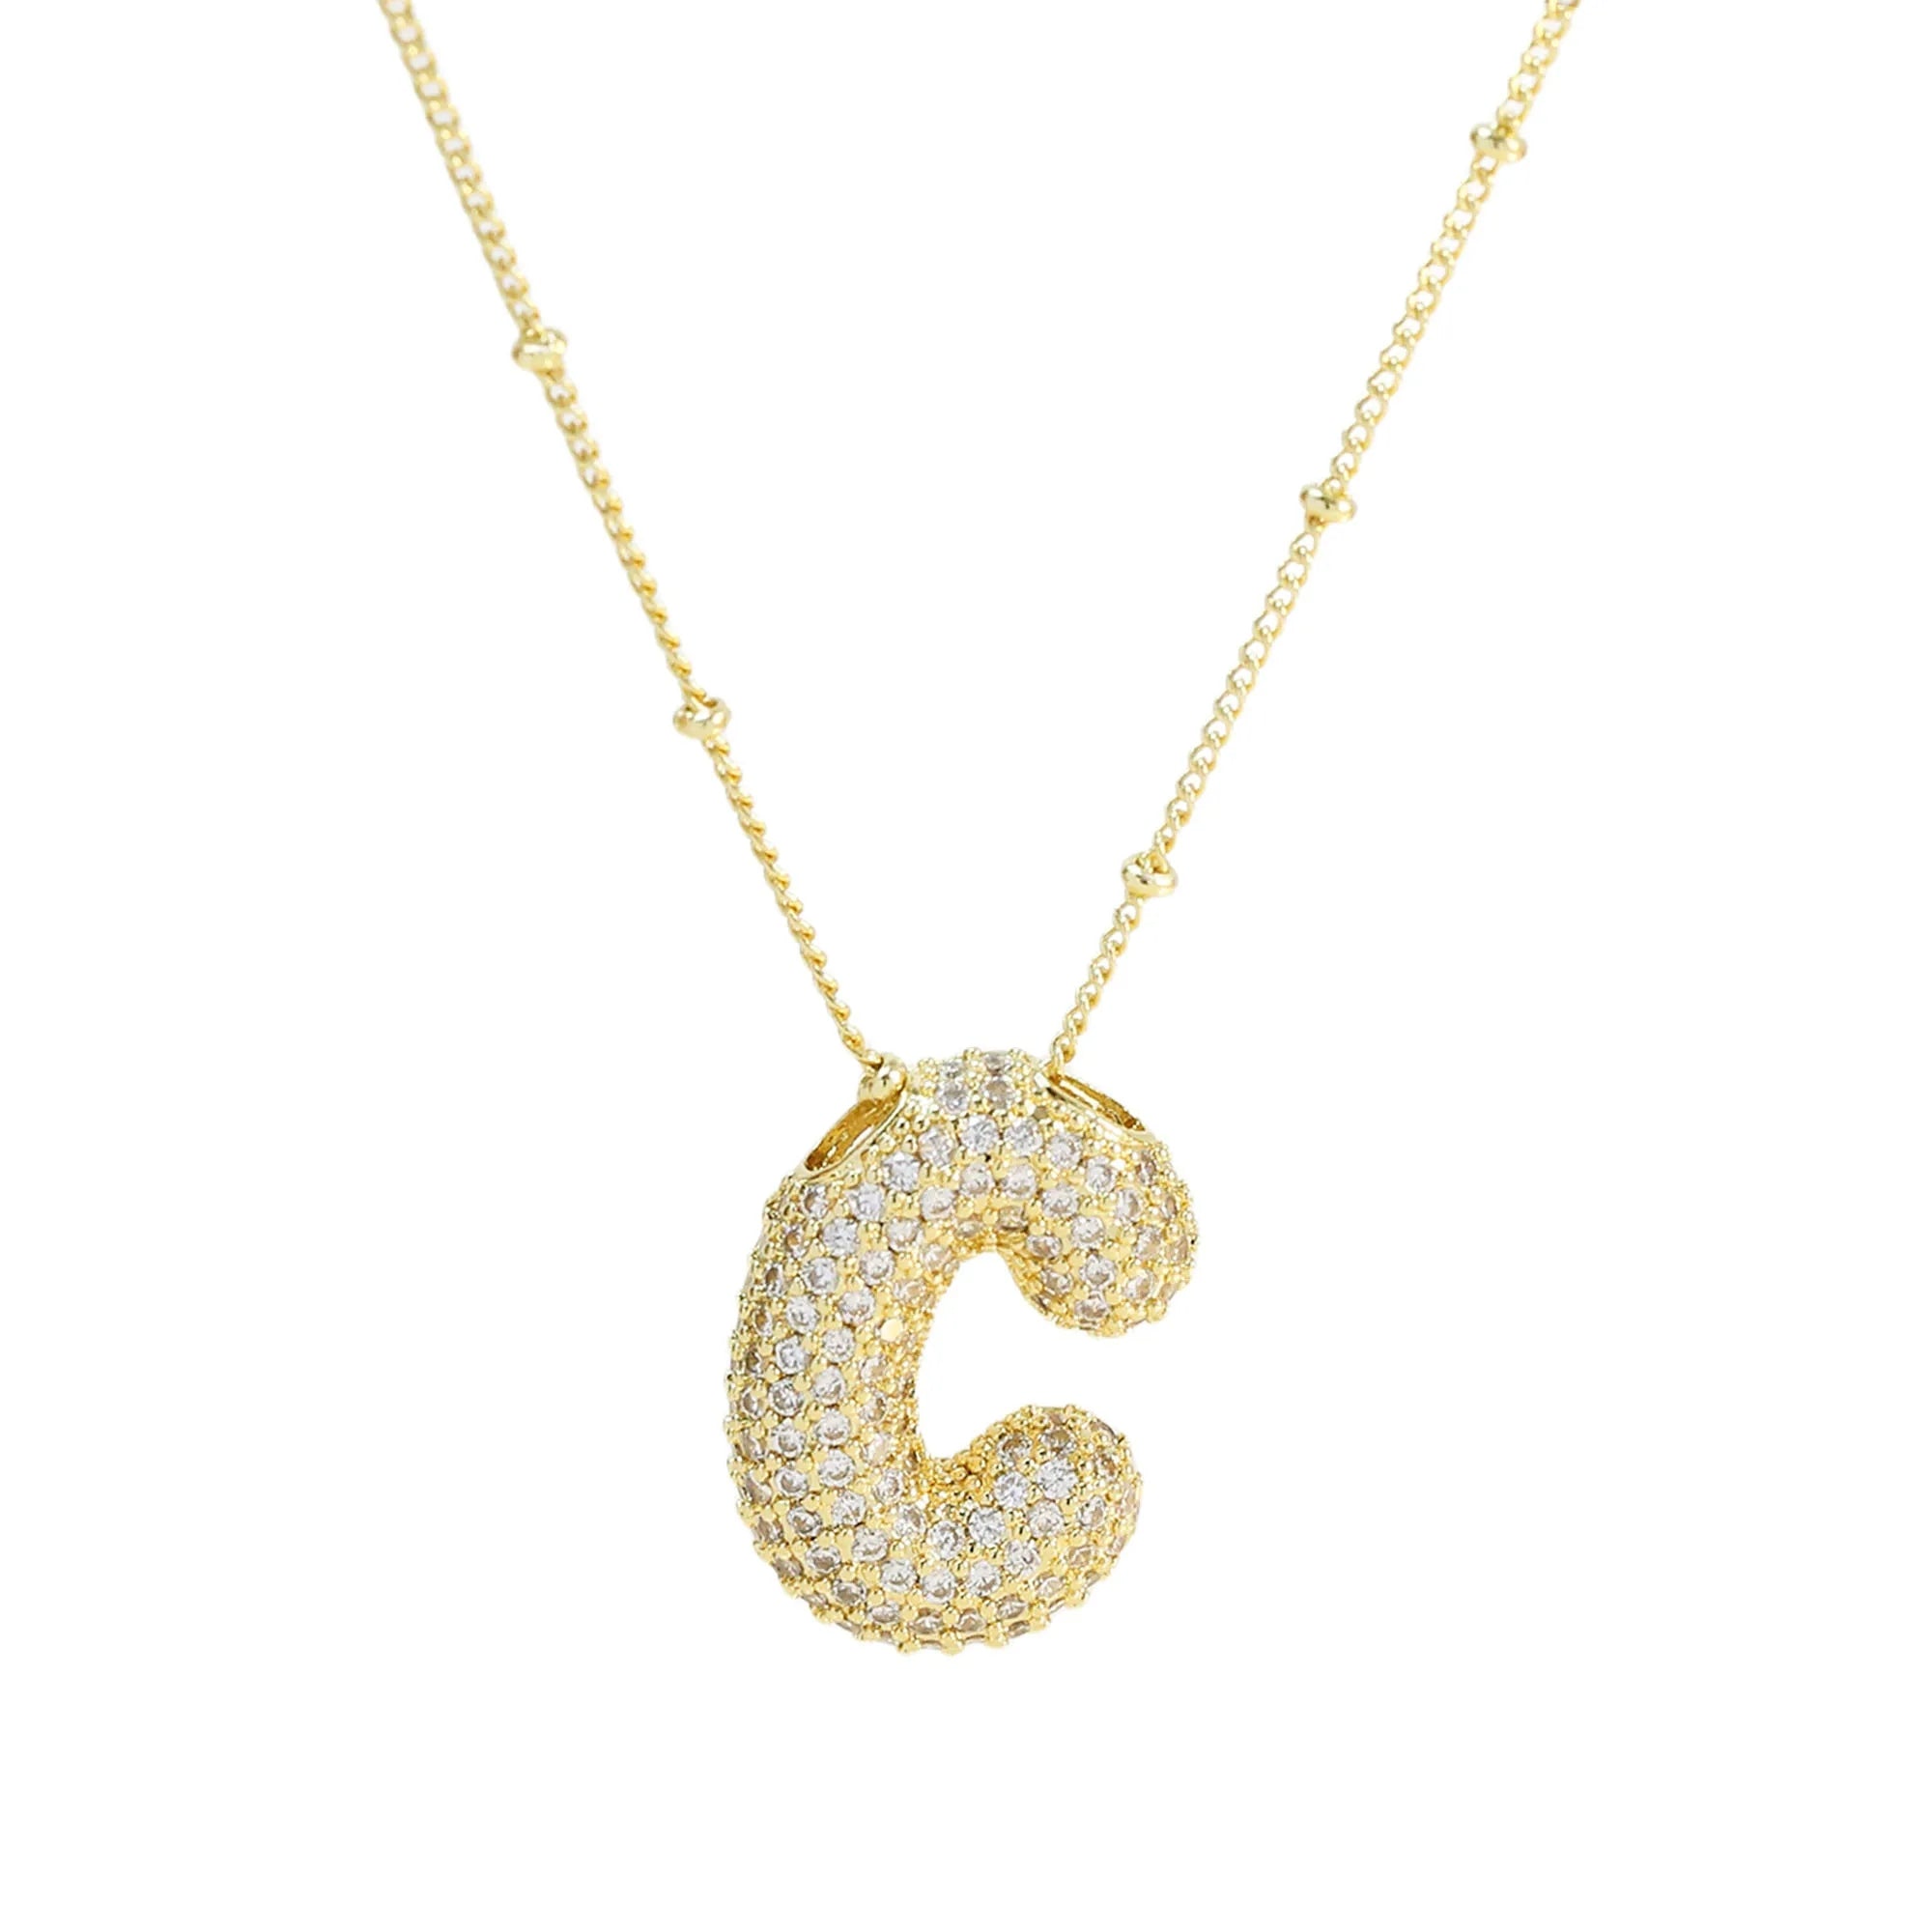 MARCELLA INITIAL NECKLACE